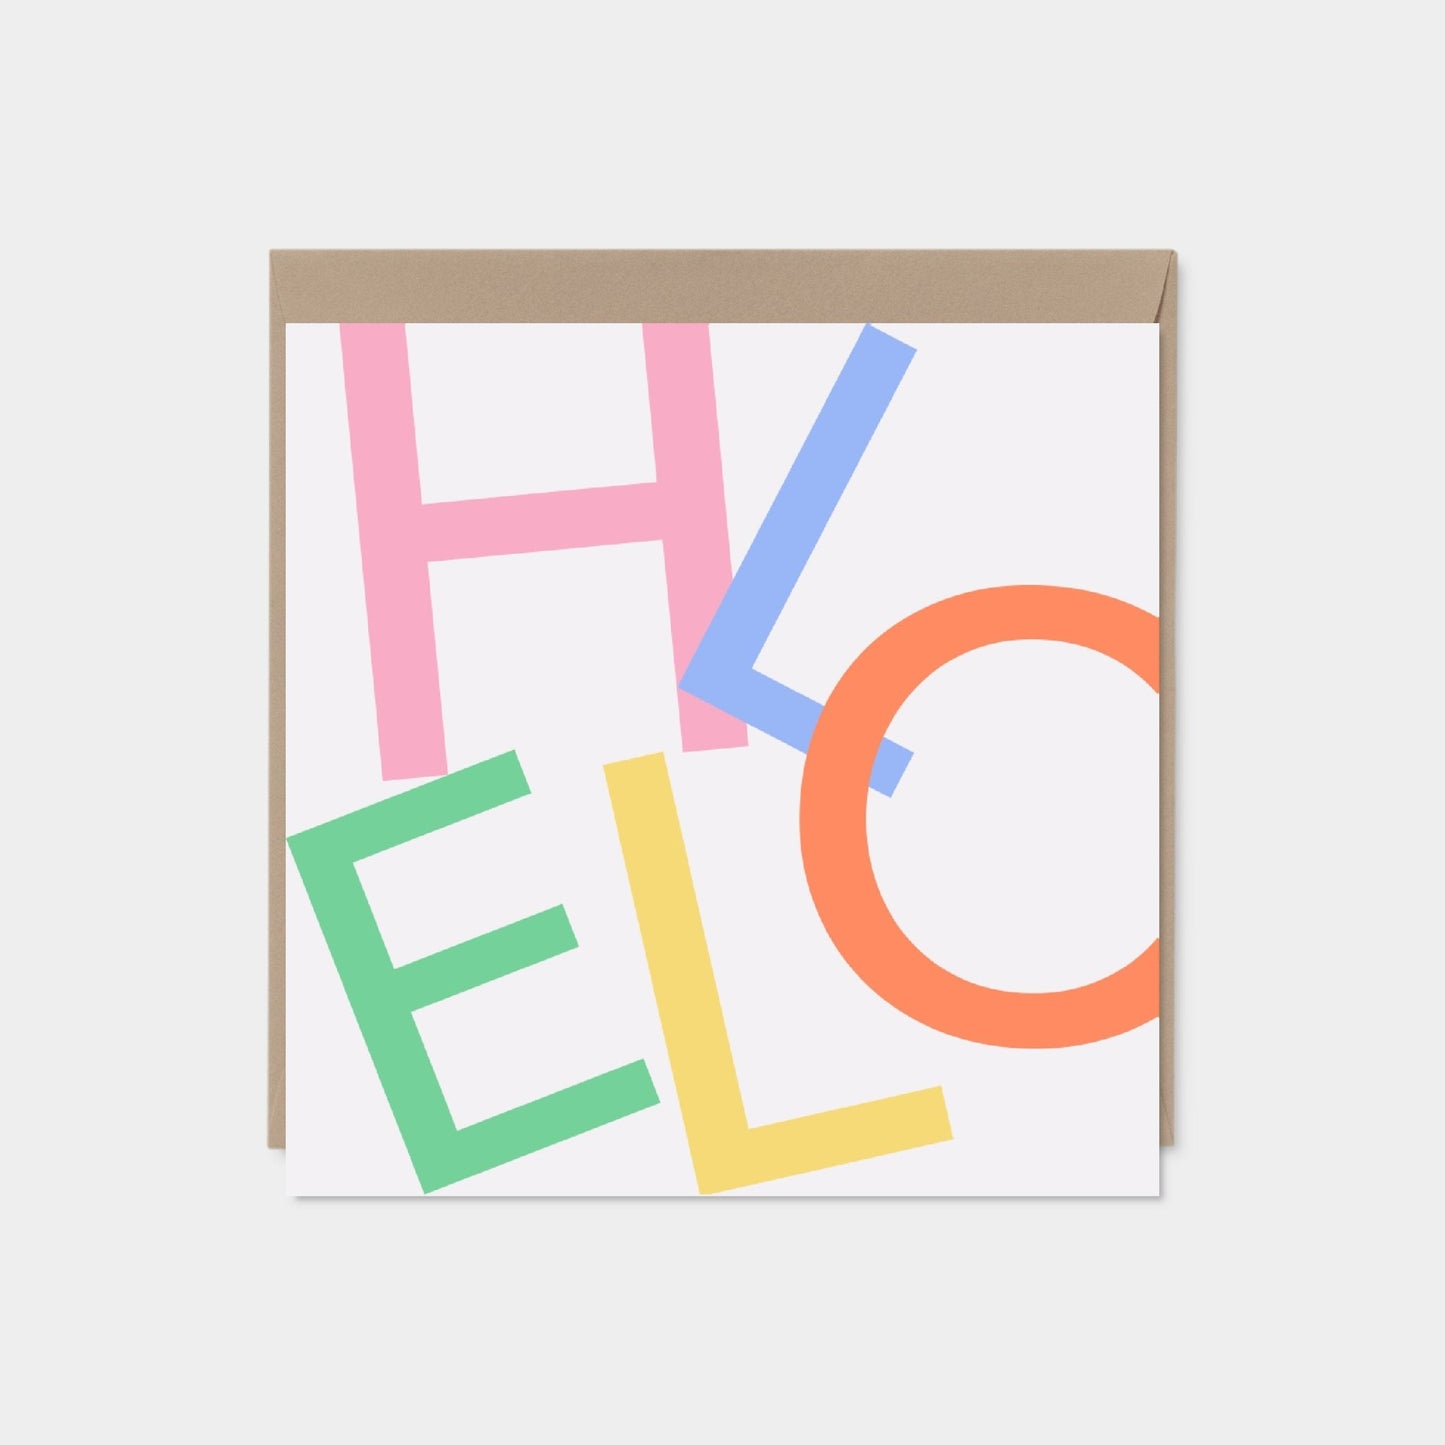 HELLO Colorful Square Greeting Card,